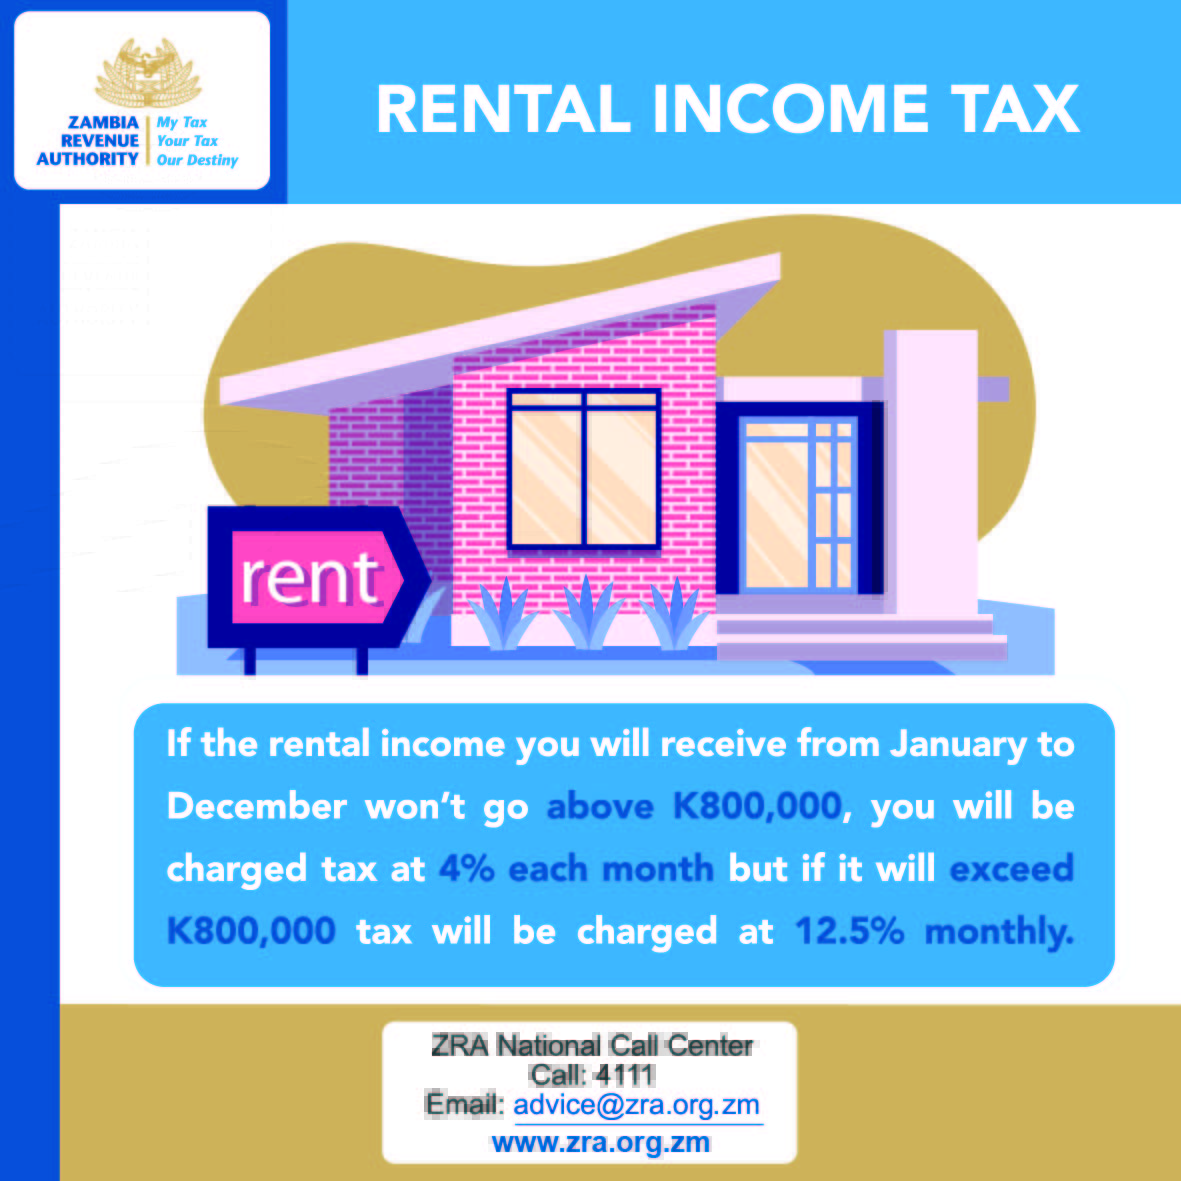 Tune to ZNBC Radio 4 - 88.1 FM at 12:00hrs for the Rental Income Tax discussion. You can post all your questions in the comment box and we will gladly attend to you. #RentalIncome #Rent #Tax #TaxCompliance